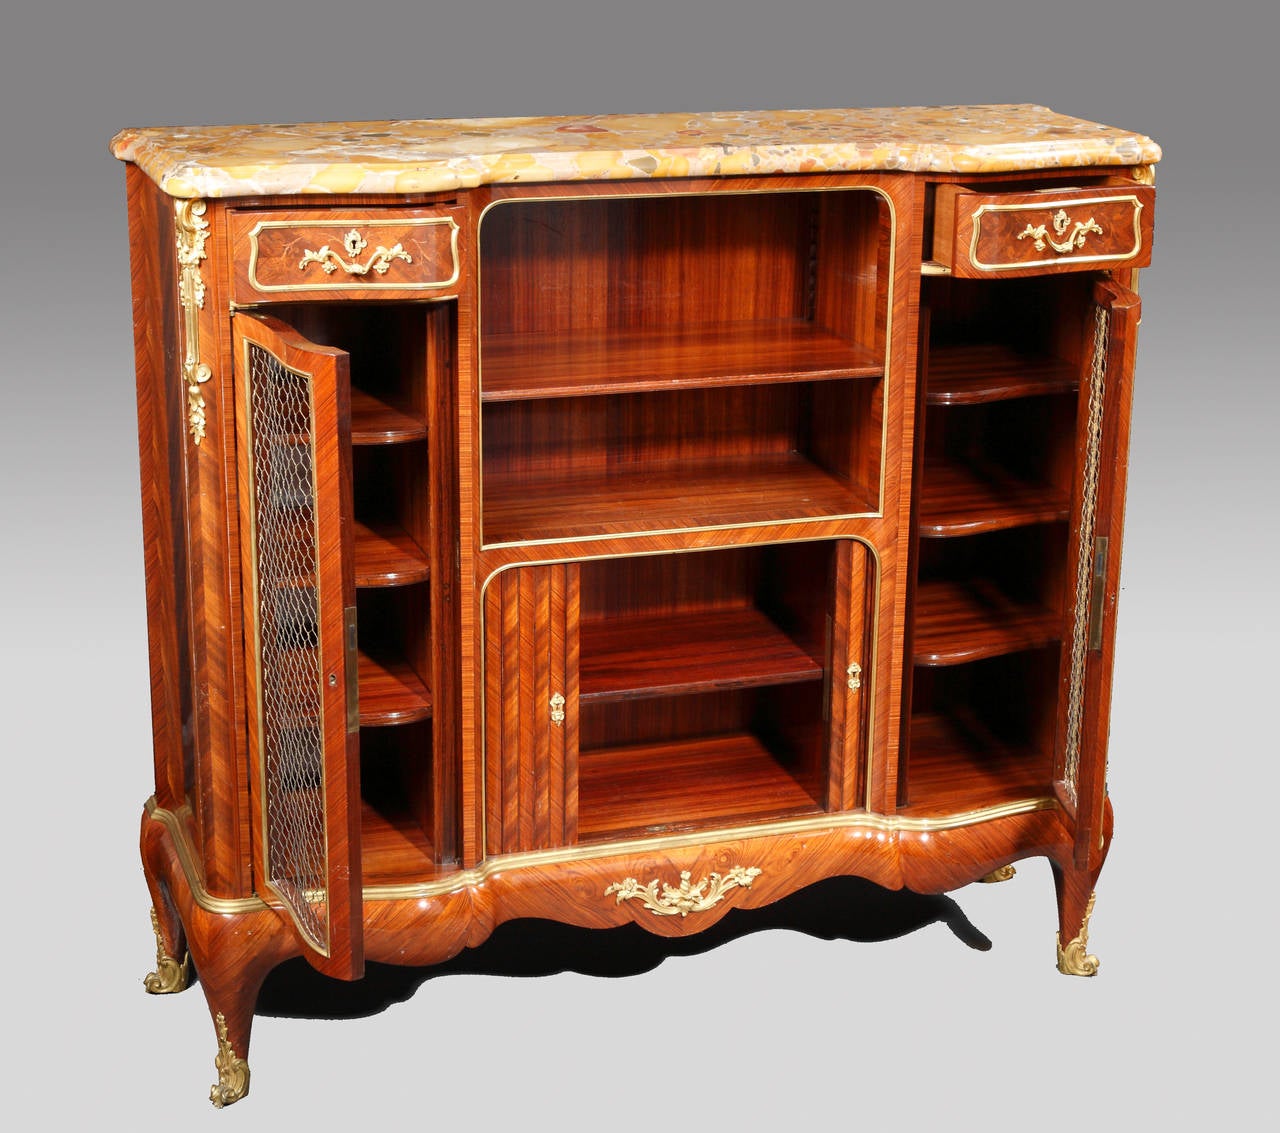 Stamped Sormani à Paris and signed on the lockplates P. Sormani, 10 rue Charlot, Paris.

Rare pair of Louis XV style side bookcase-cabinets of exceptional quality made in kingwood and tulipwood veneer, topped with moulded and serpentine shaped